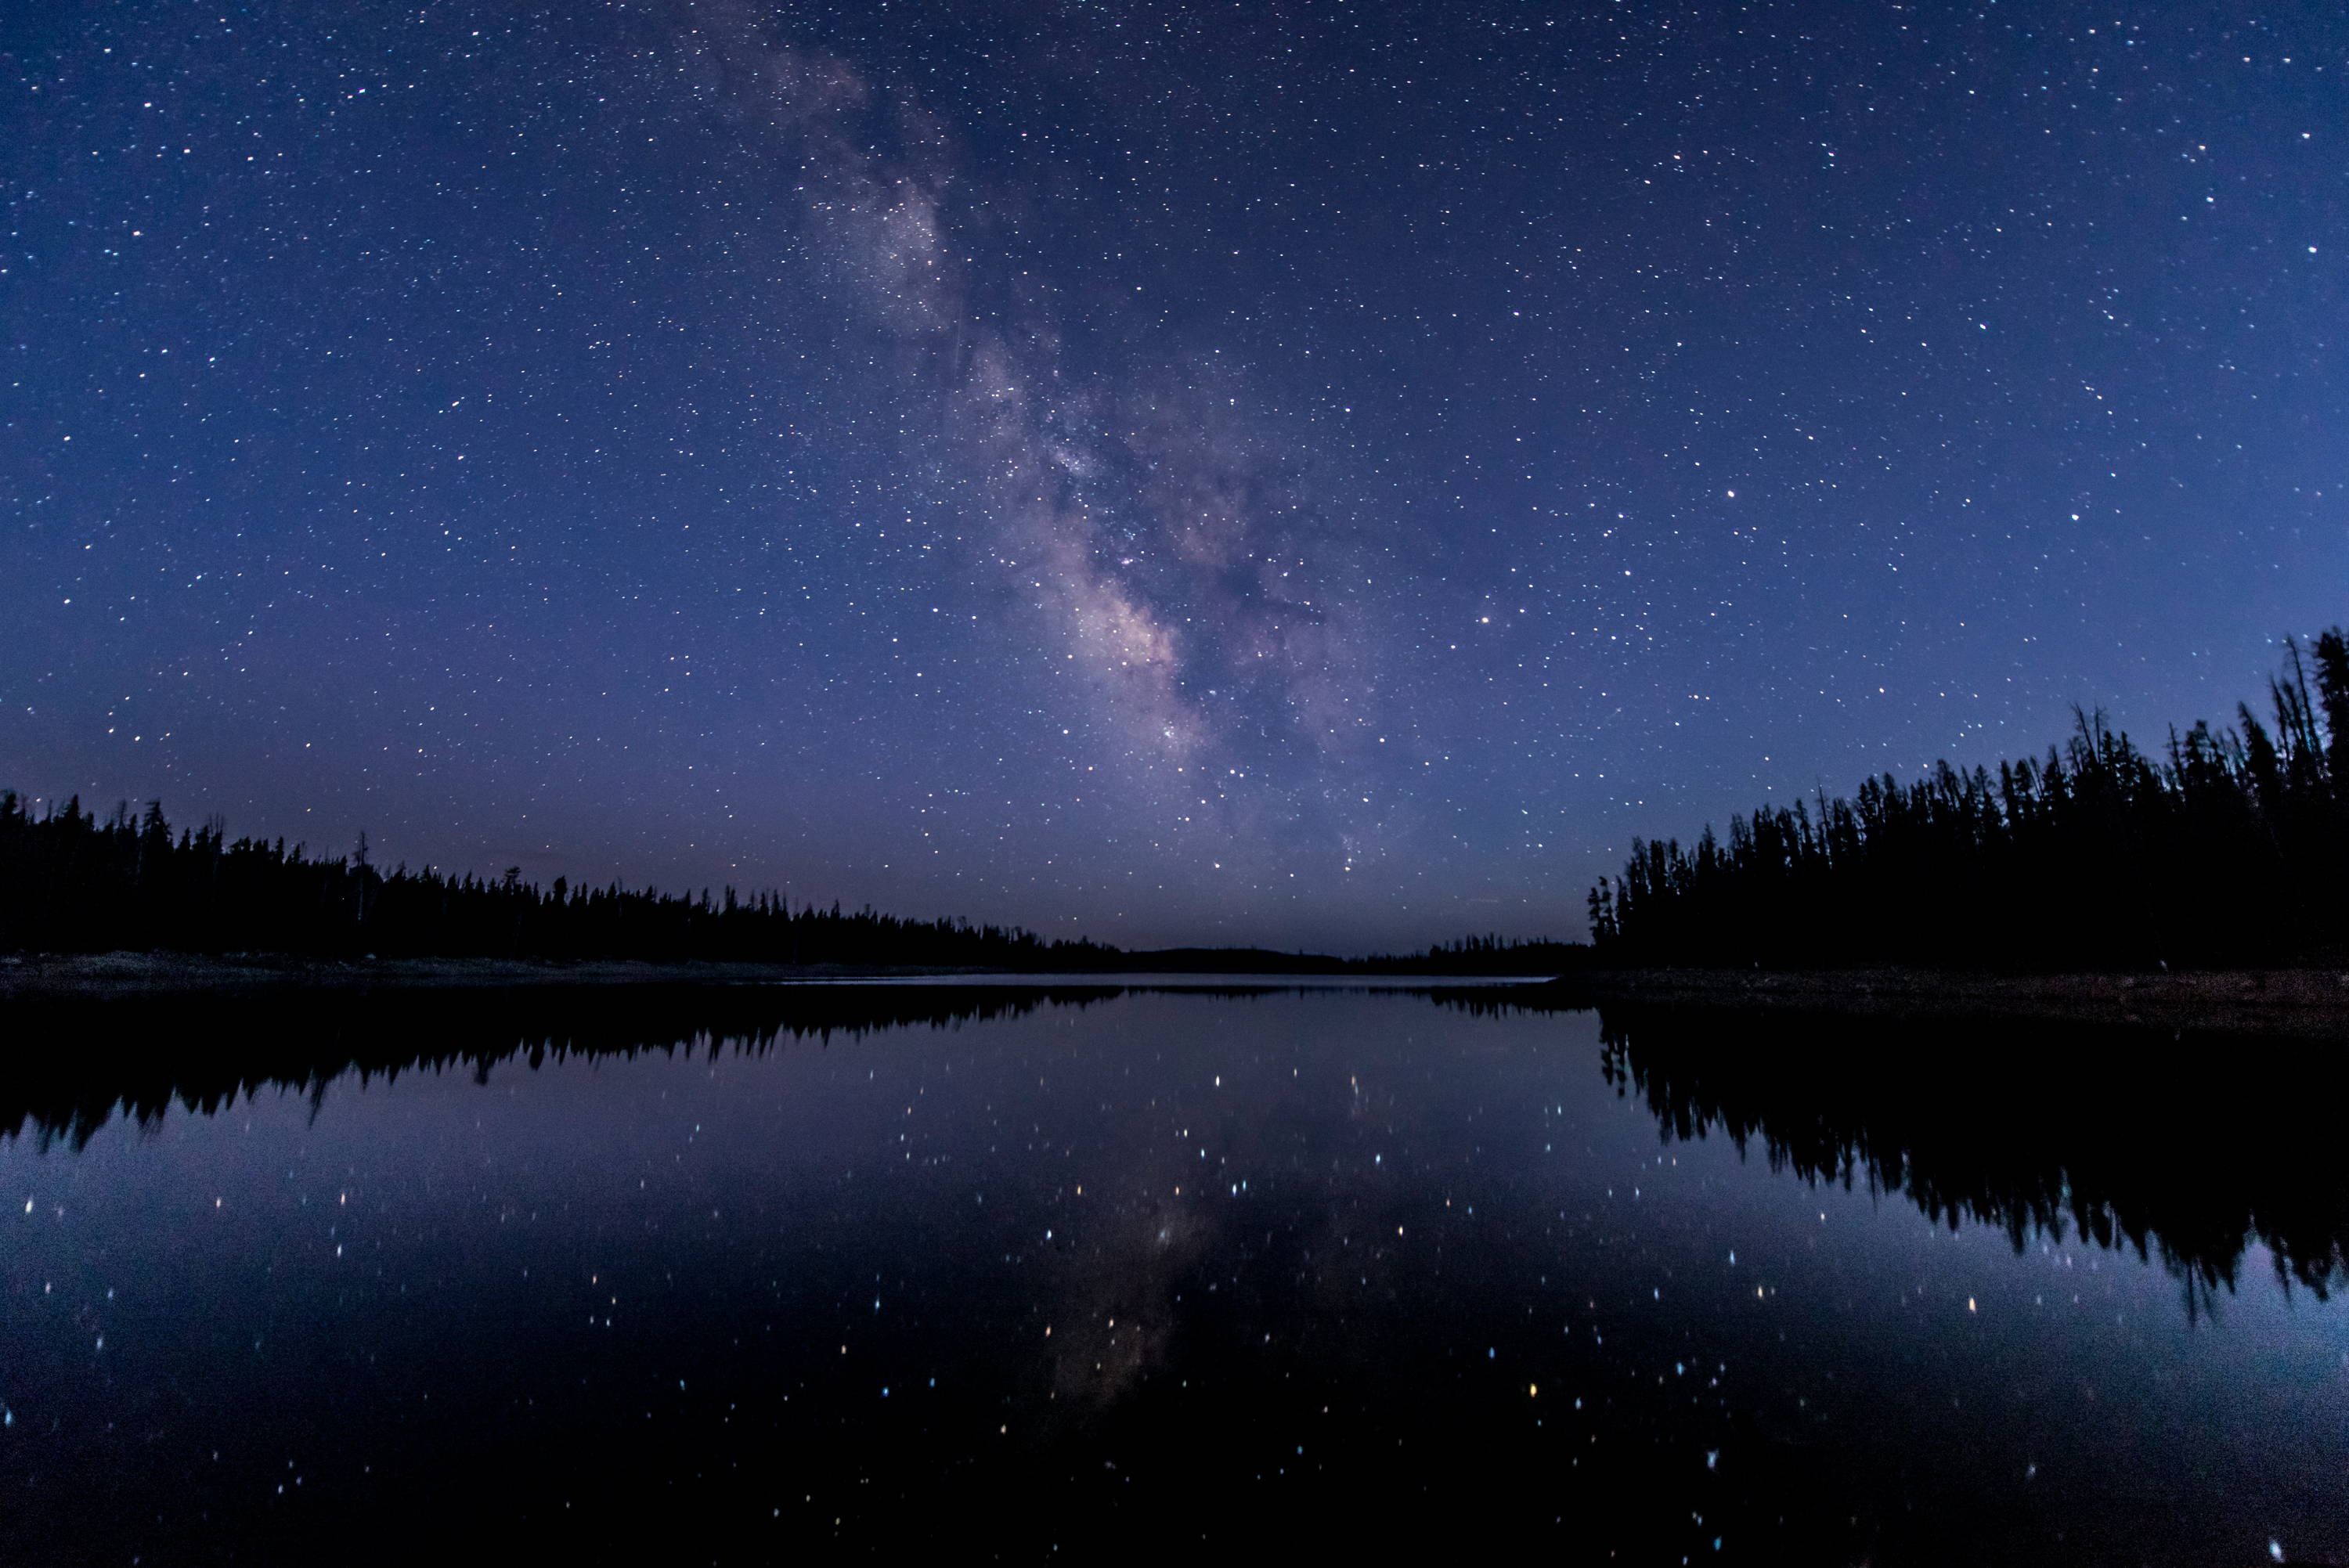 The night sky with stars over a lake